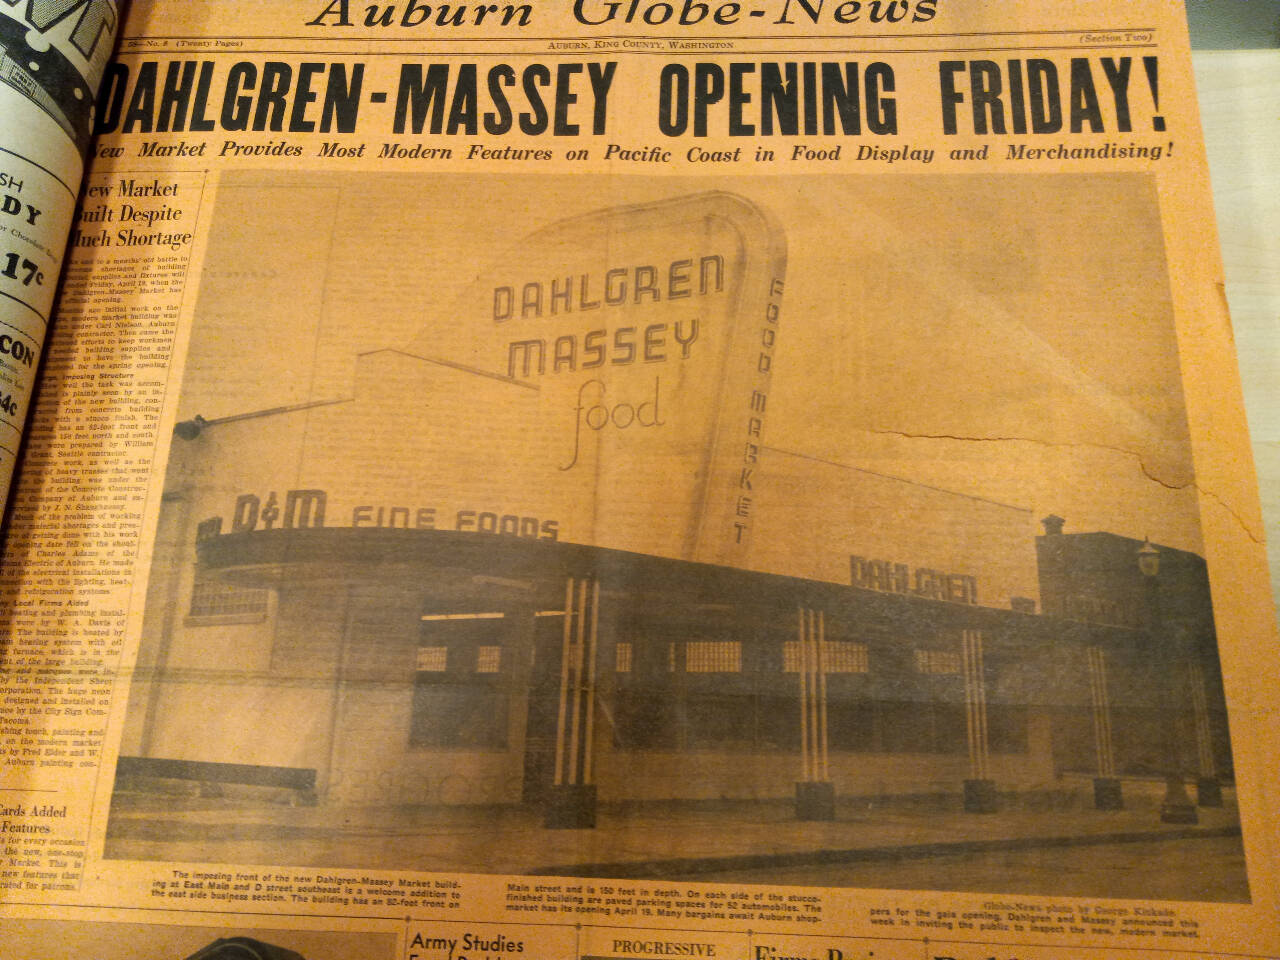 The April 17 edition of the old Auburn Globe advances the opening of Dahlgren-Massey Fine Foods two days later. Photo from the White River Valley Museum collection